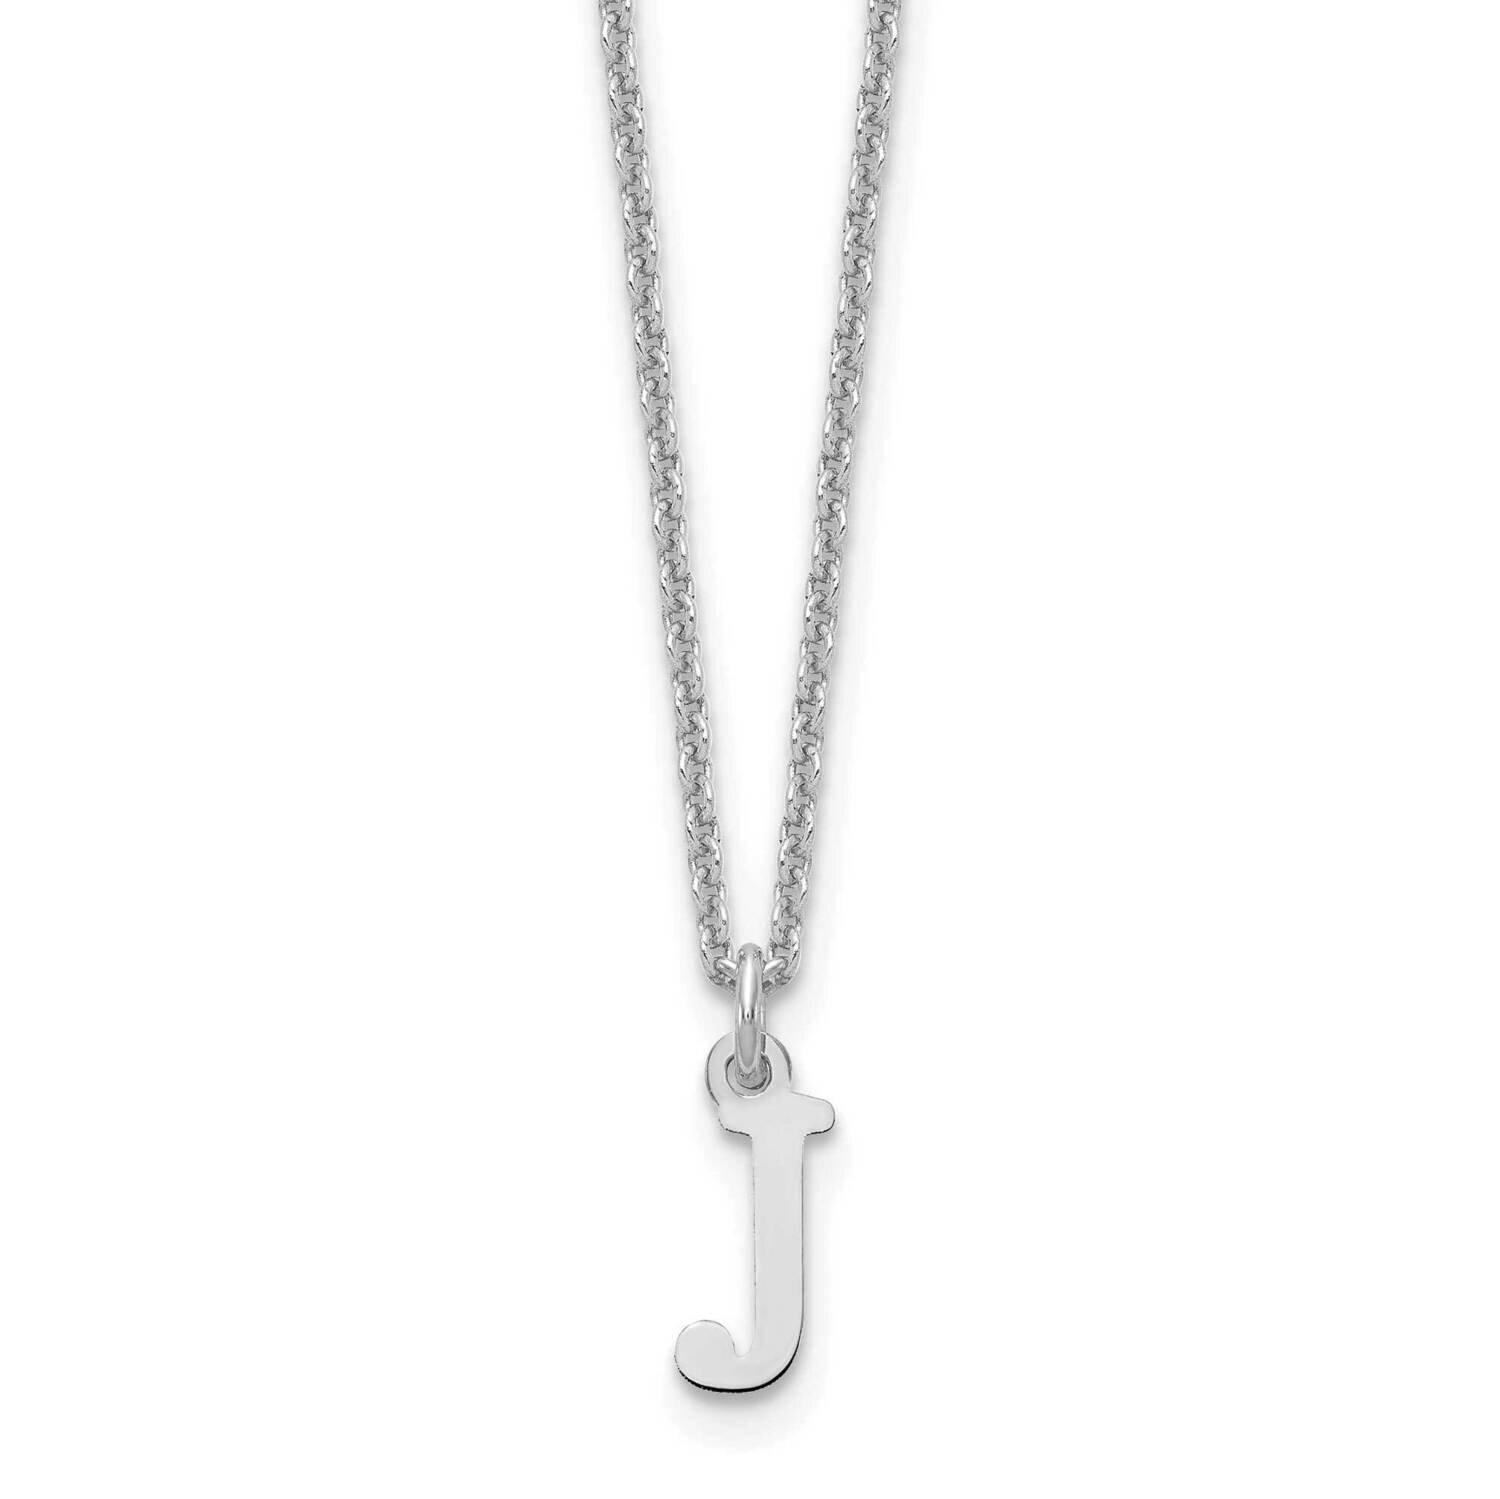 Letter J Initial Pendant with Chain 14k White Gold Cutout XNA727W/J